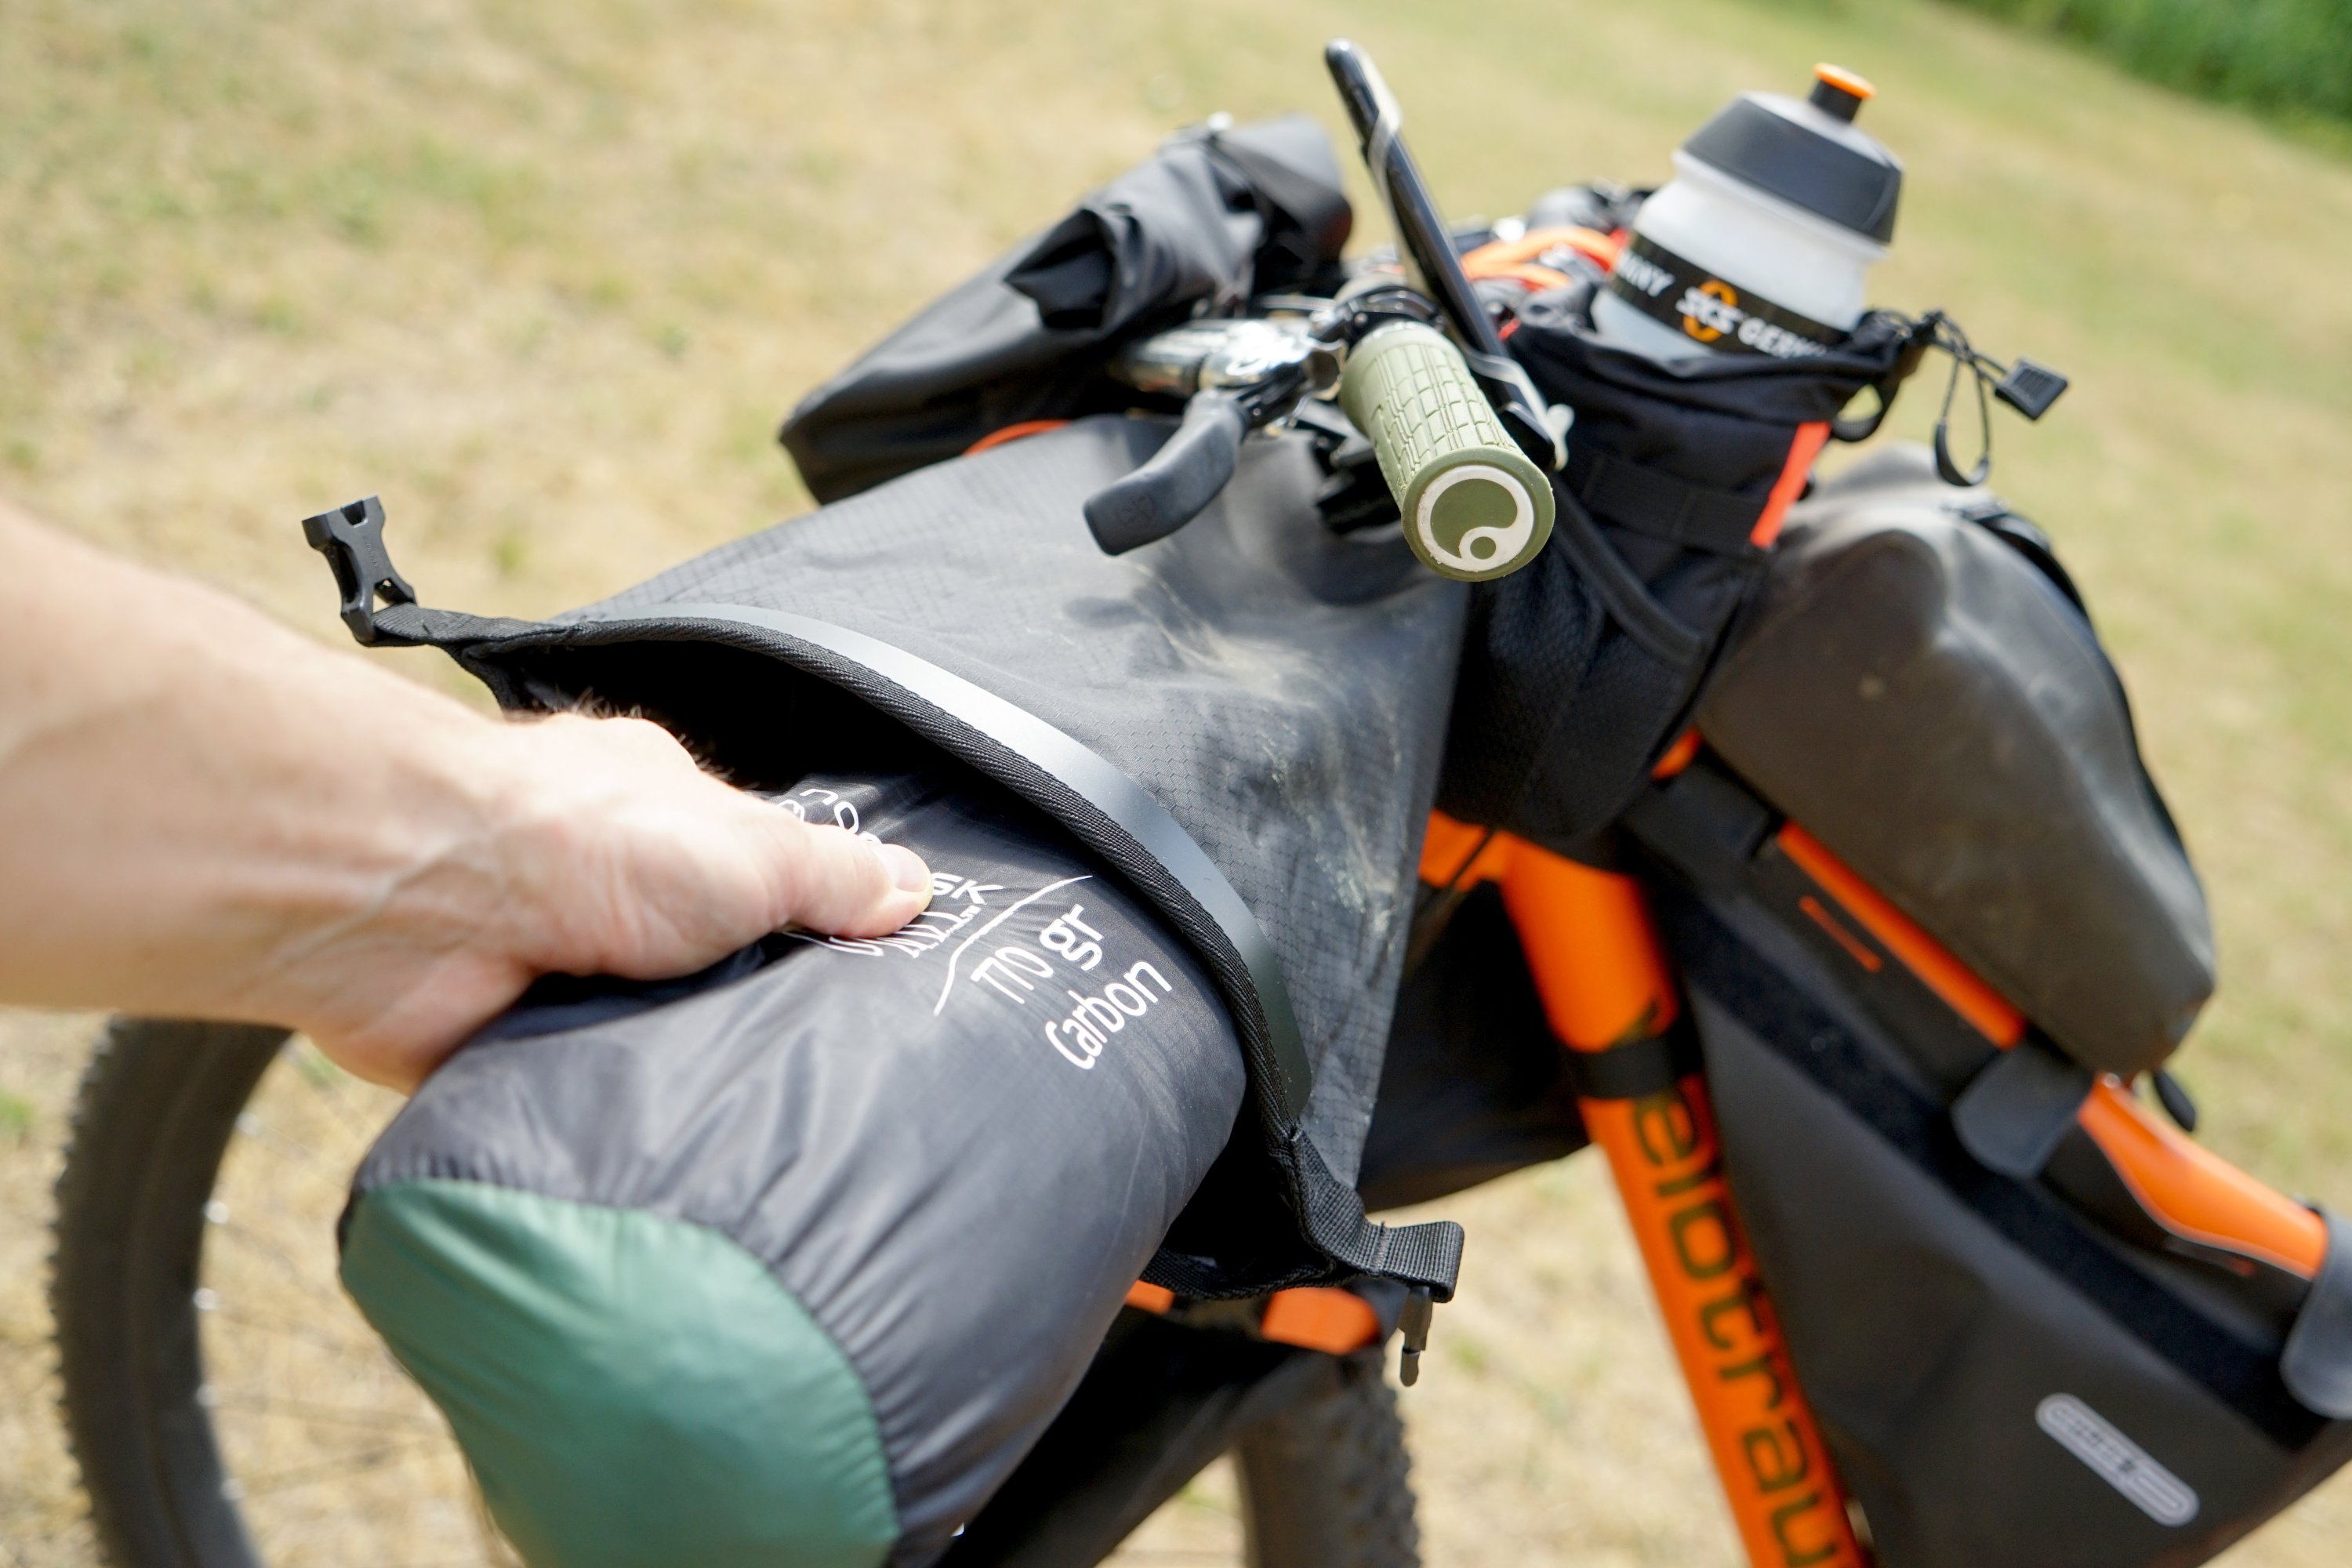 Lightweight equipment such as this one-man tent, which weighs just under 800 grams, is well accommodated in this handlebar bag. (DPA Photo)